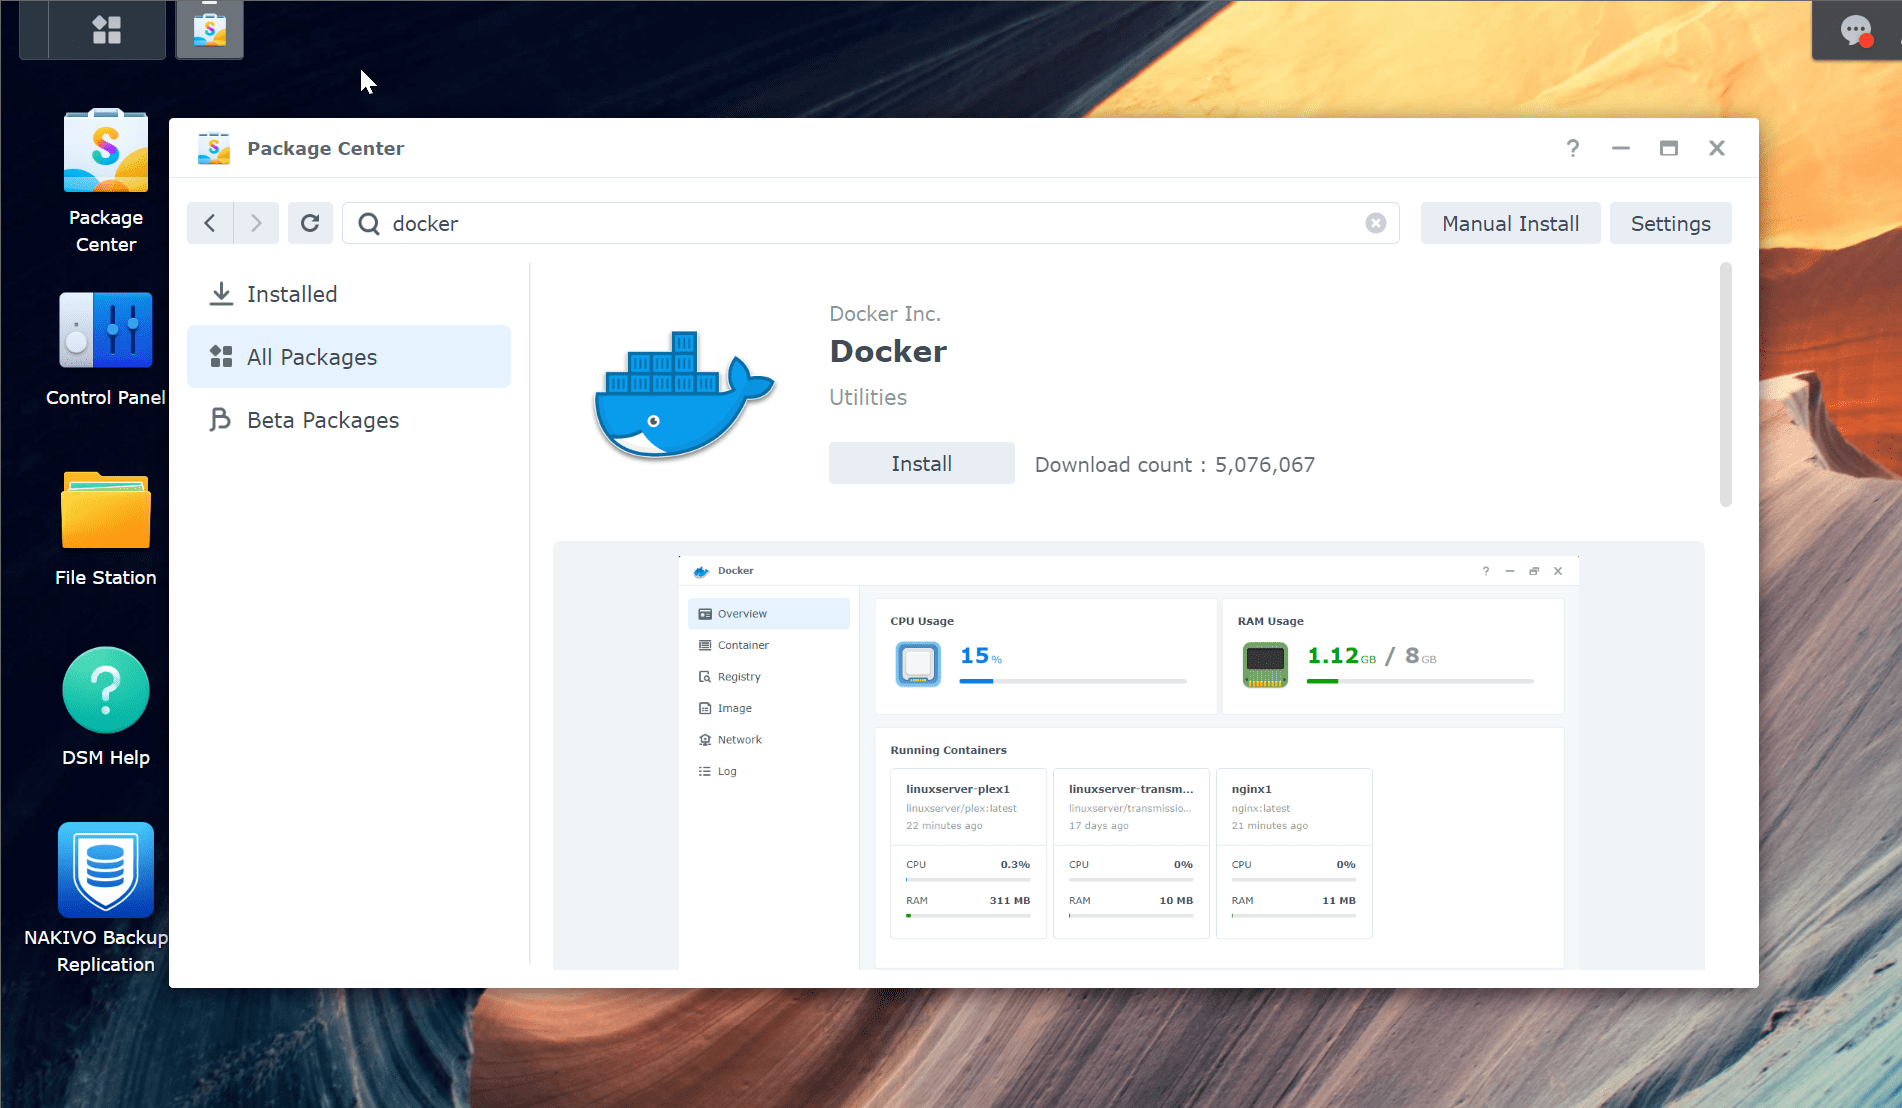 Install Docker on your Synology NAS device